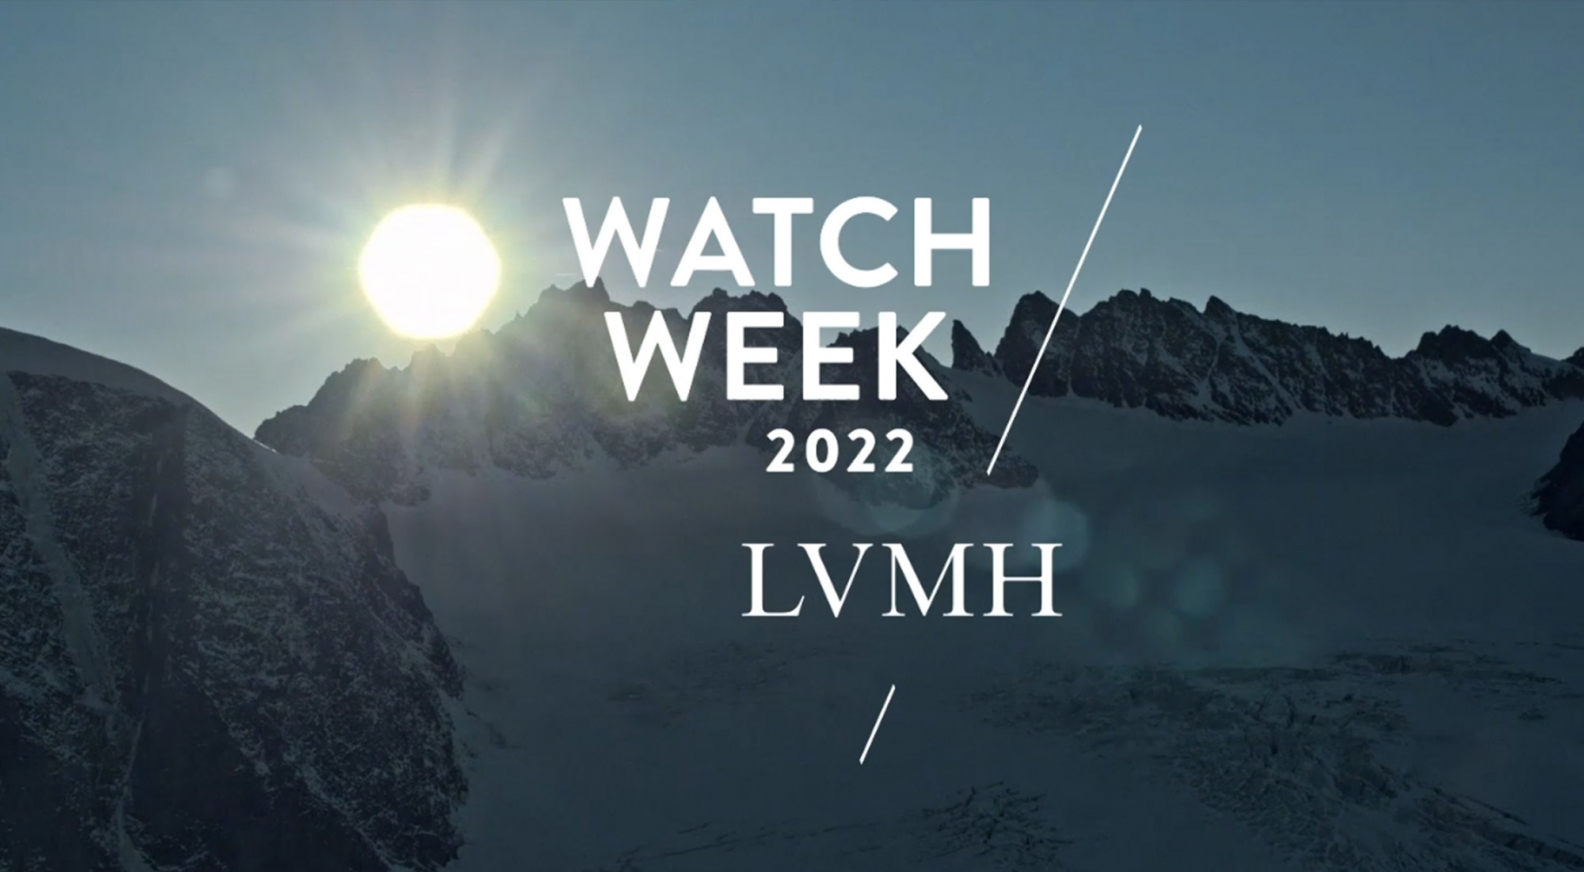 LVMH Watch Week in Dubai January 13-15, right on time for success - LVMH